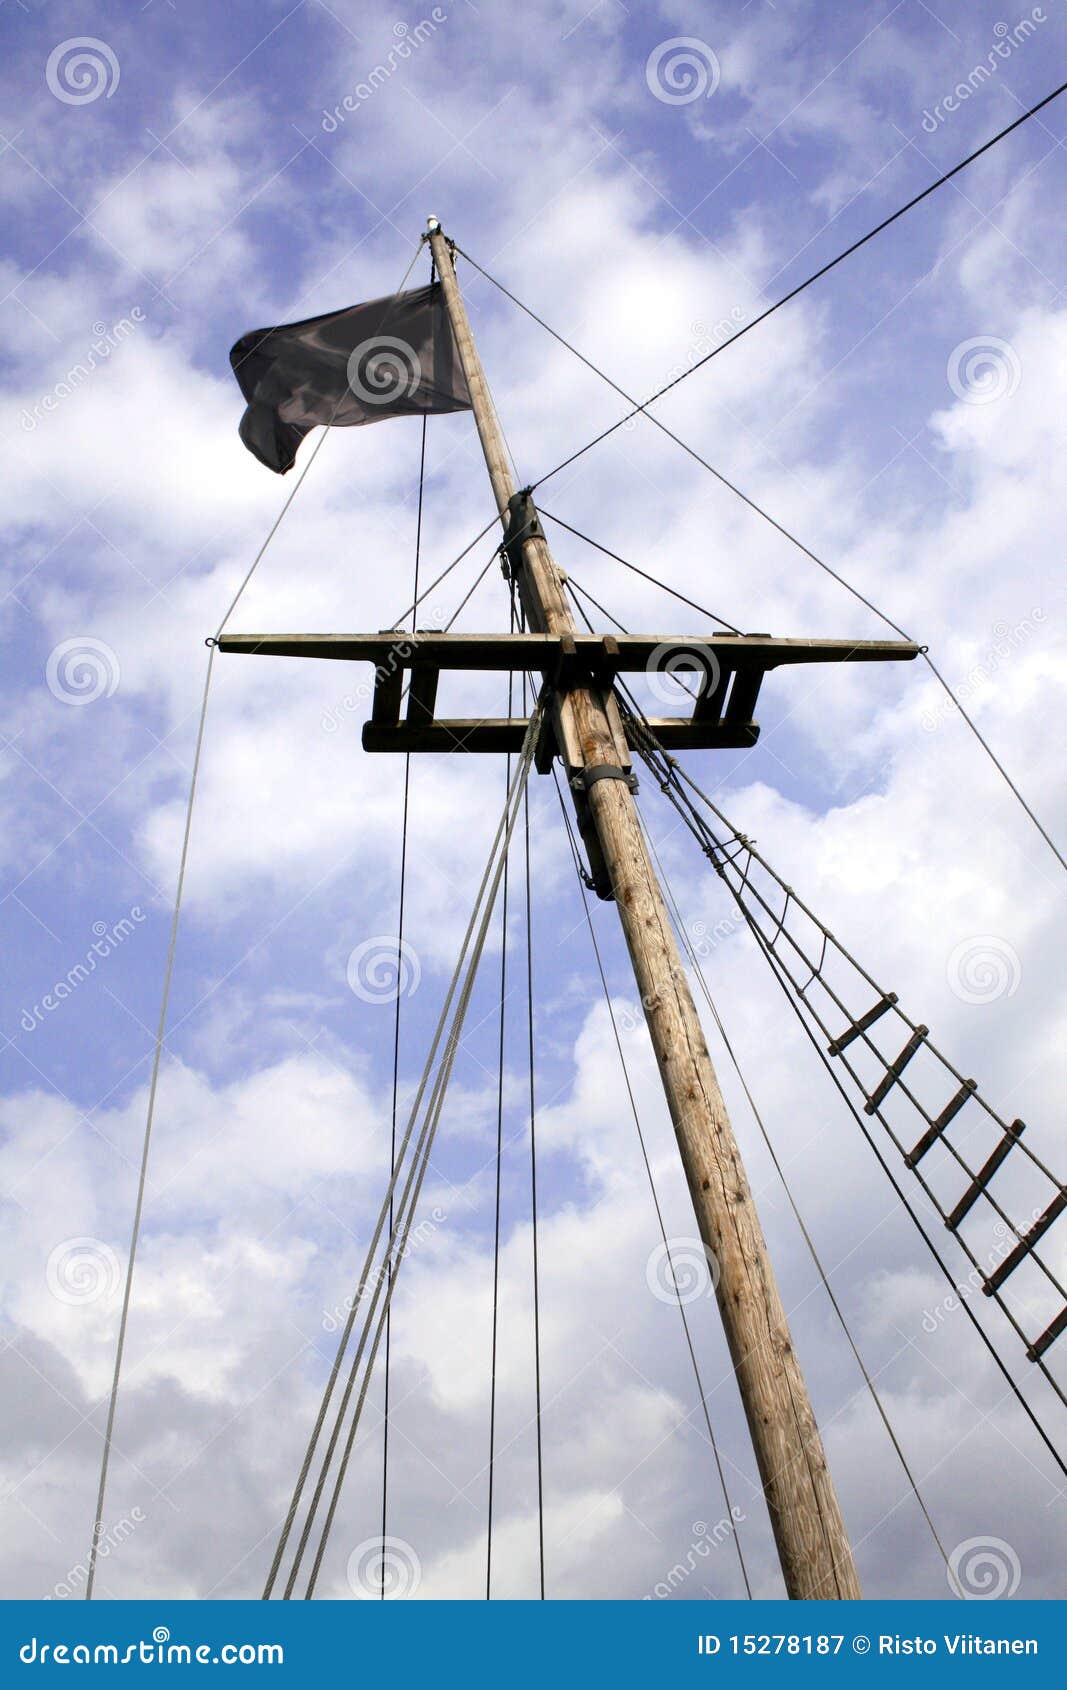 Black flag in a ship mast stock image. Image of death 